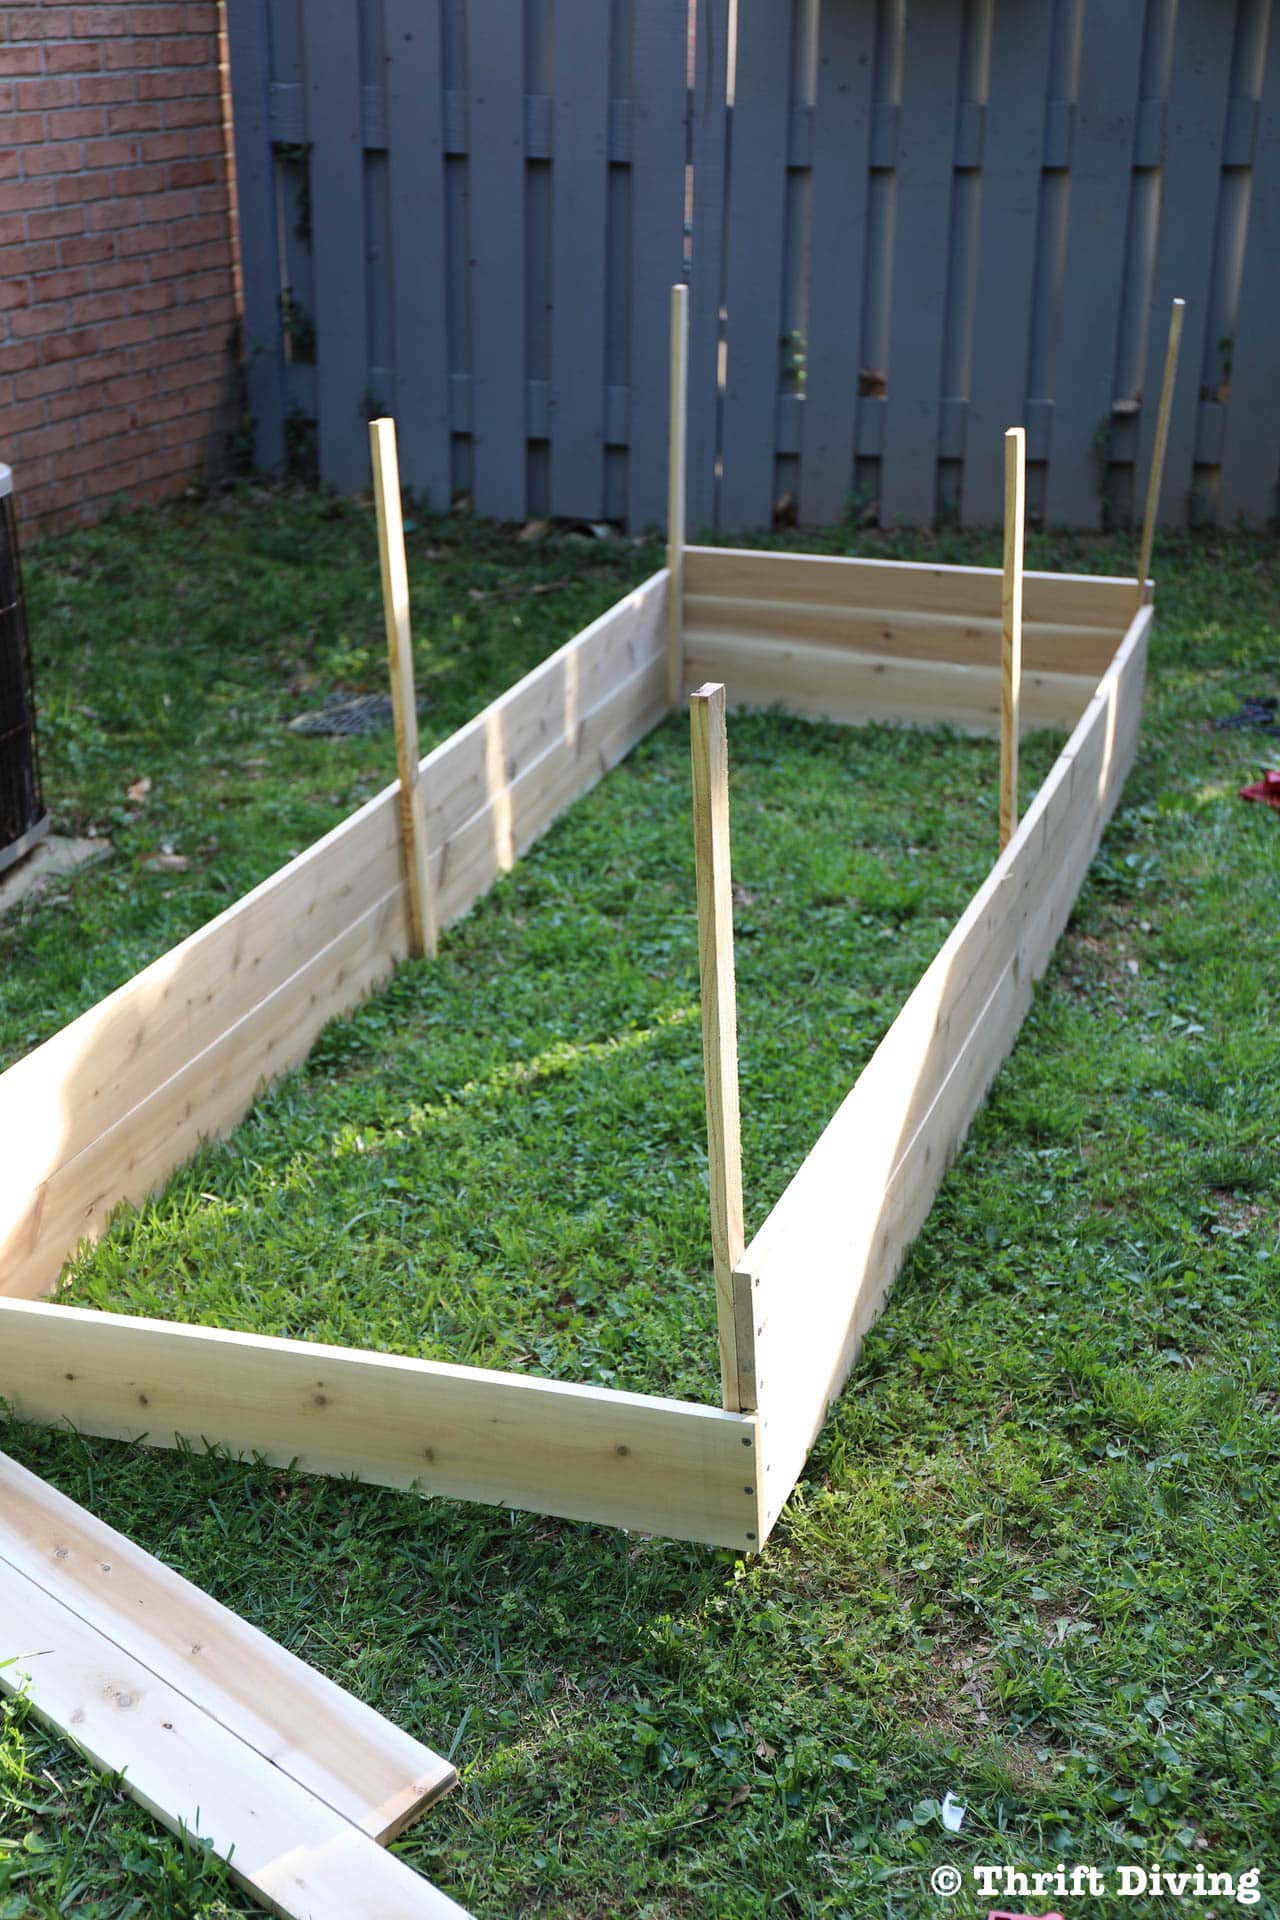 How to Build a Raised Garden Bed From Scratch - Add wooden stakes. - Thrift Diving